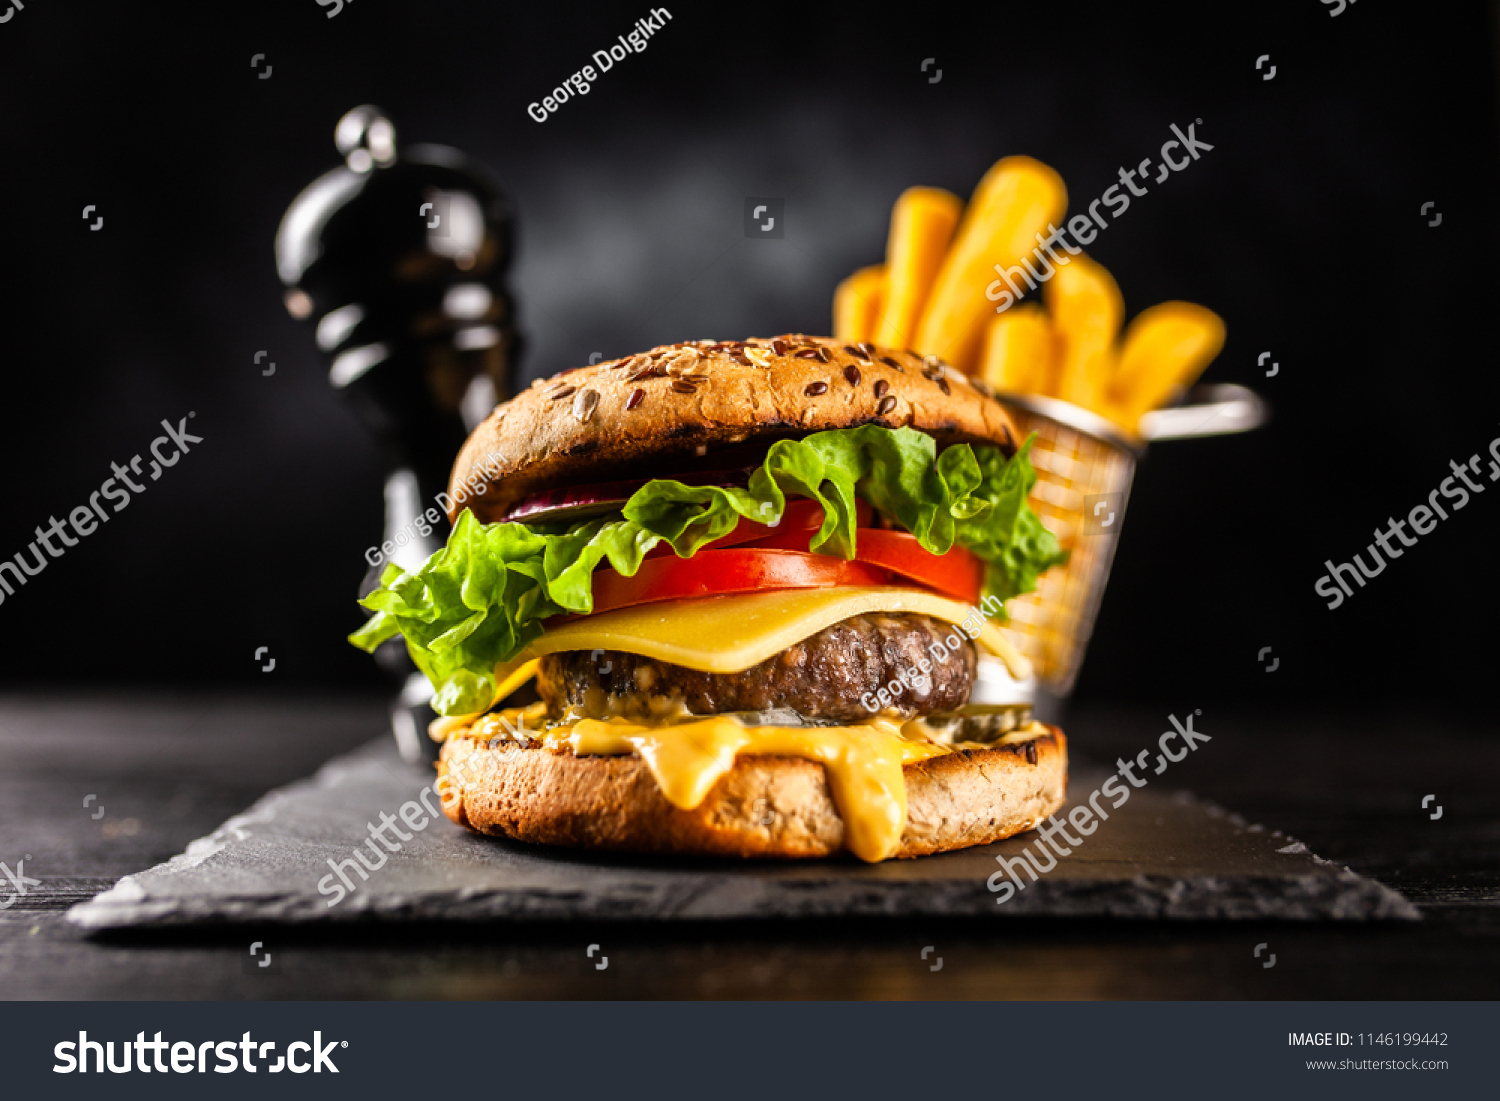 Delicious grilled burgers #1146199442